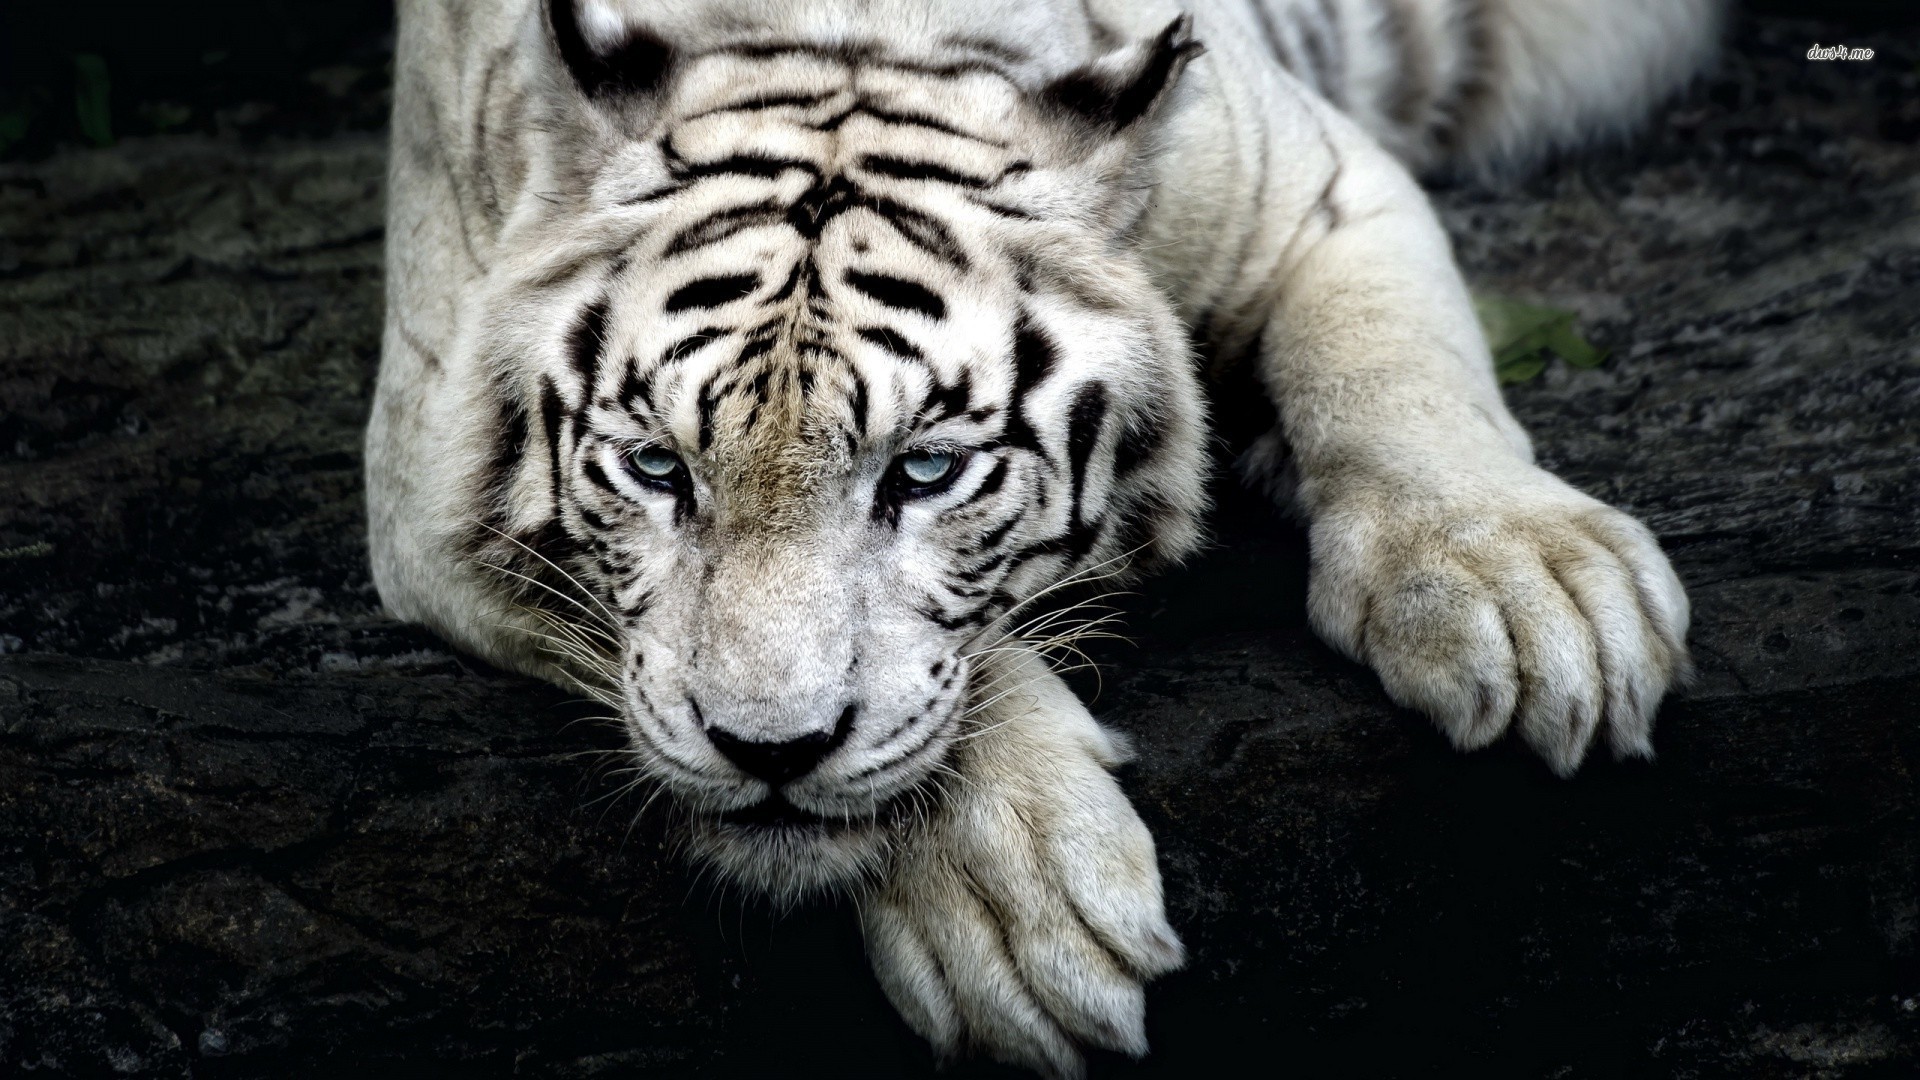 White Tiger Cool Backgrounds Wallpapers 6723   Amazing